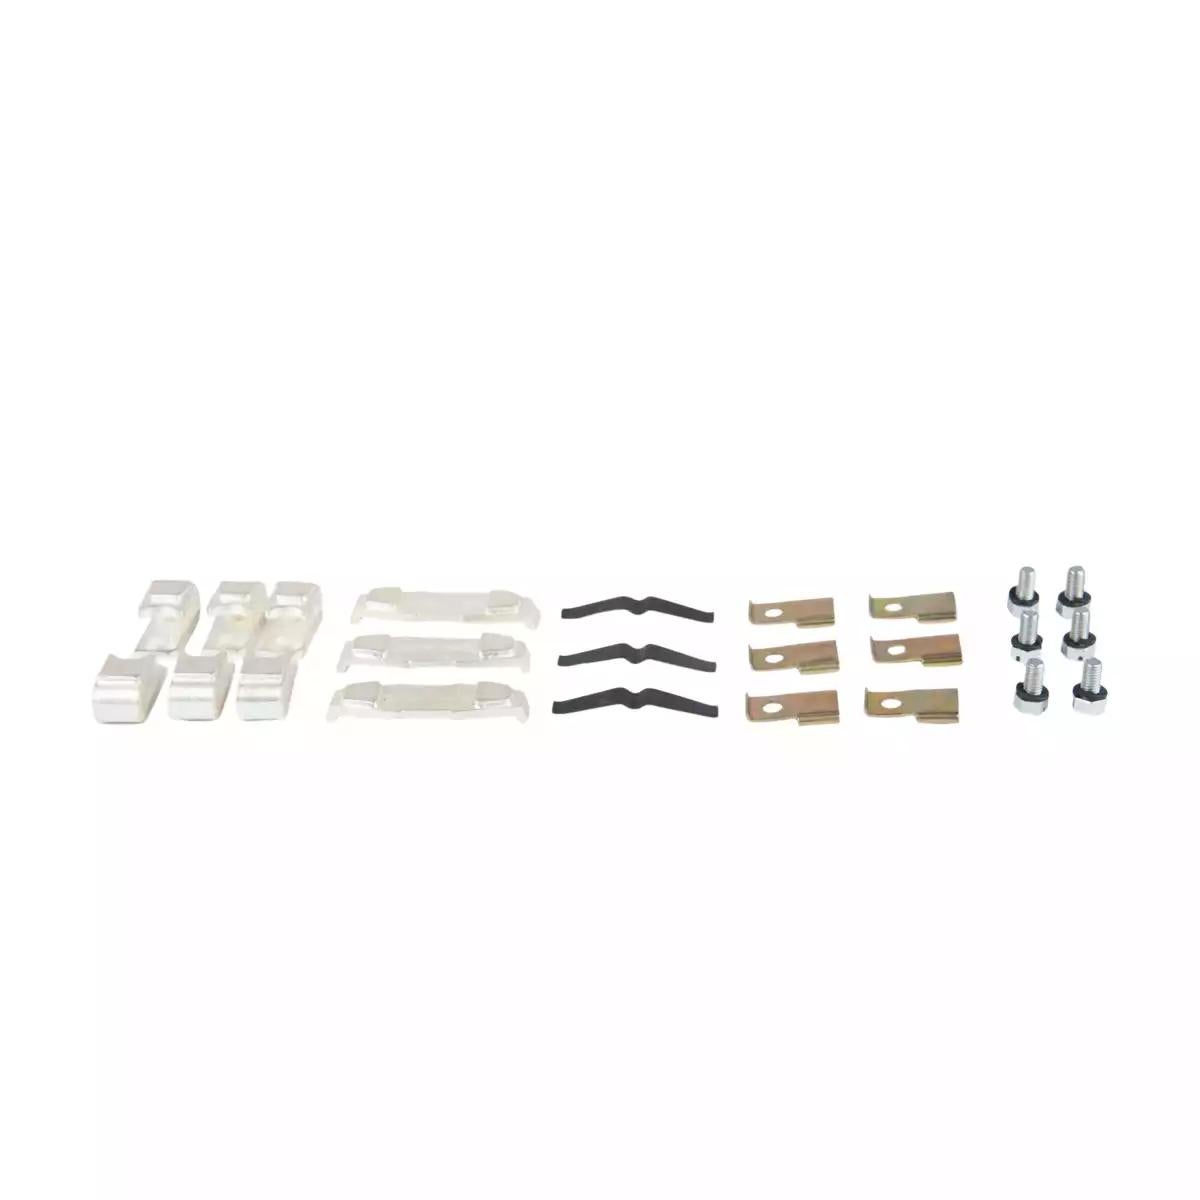 MNX 50 - Spare Contact Kit